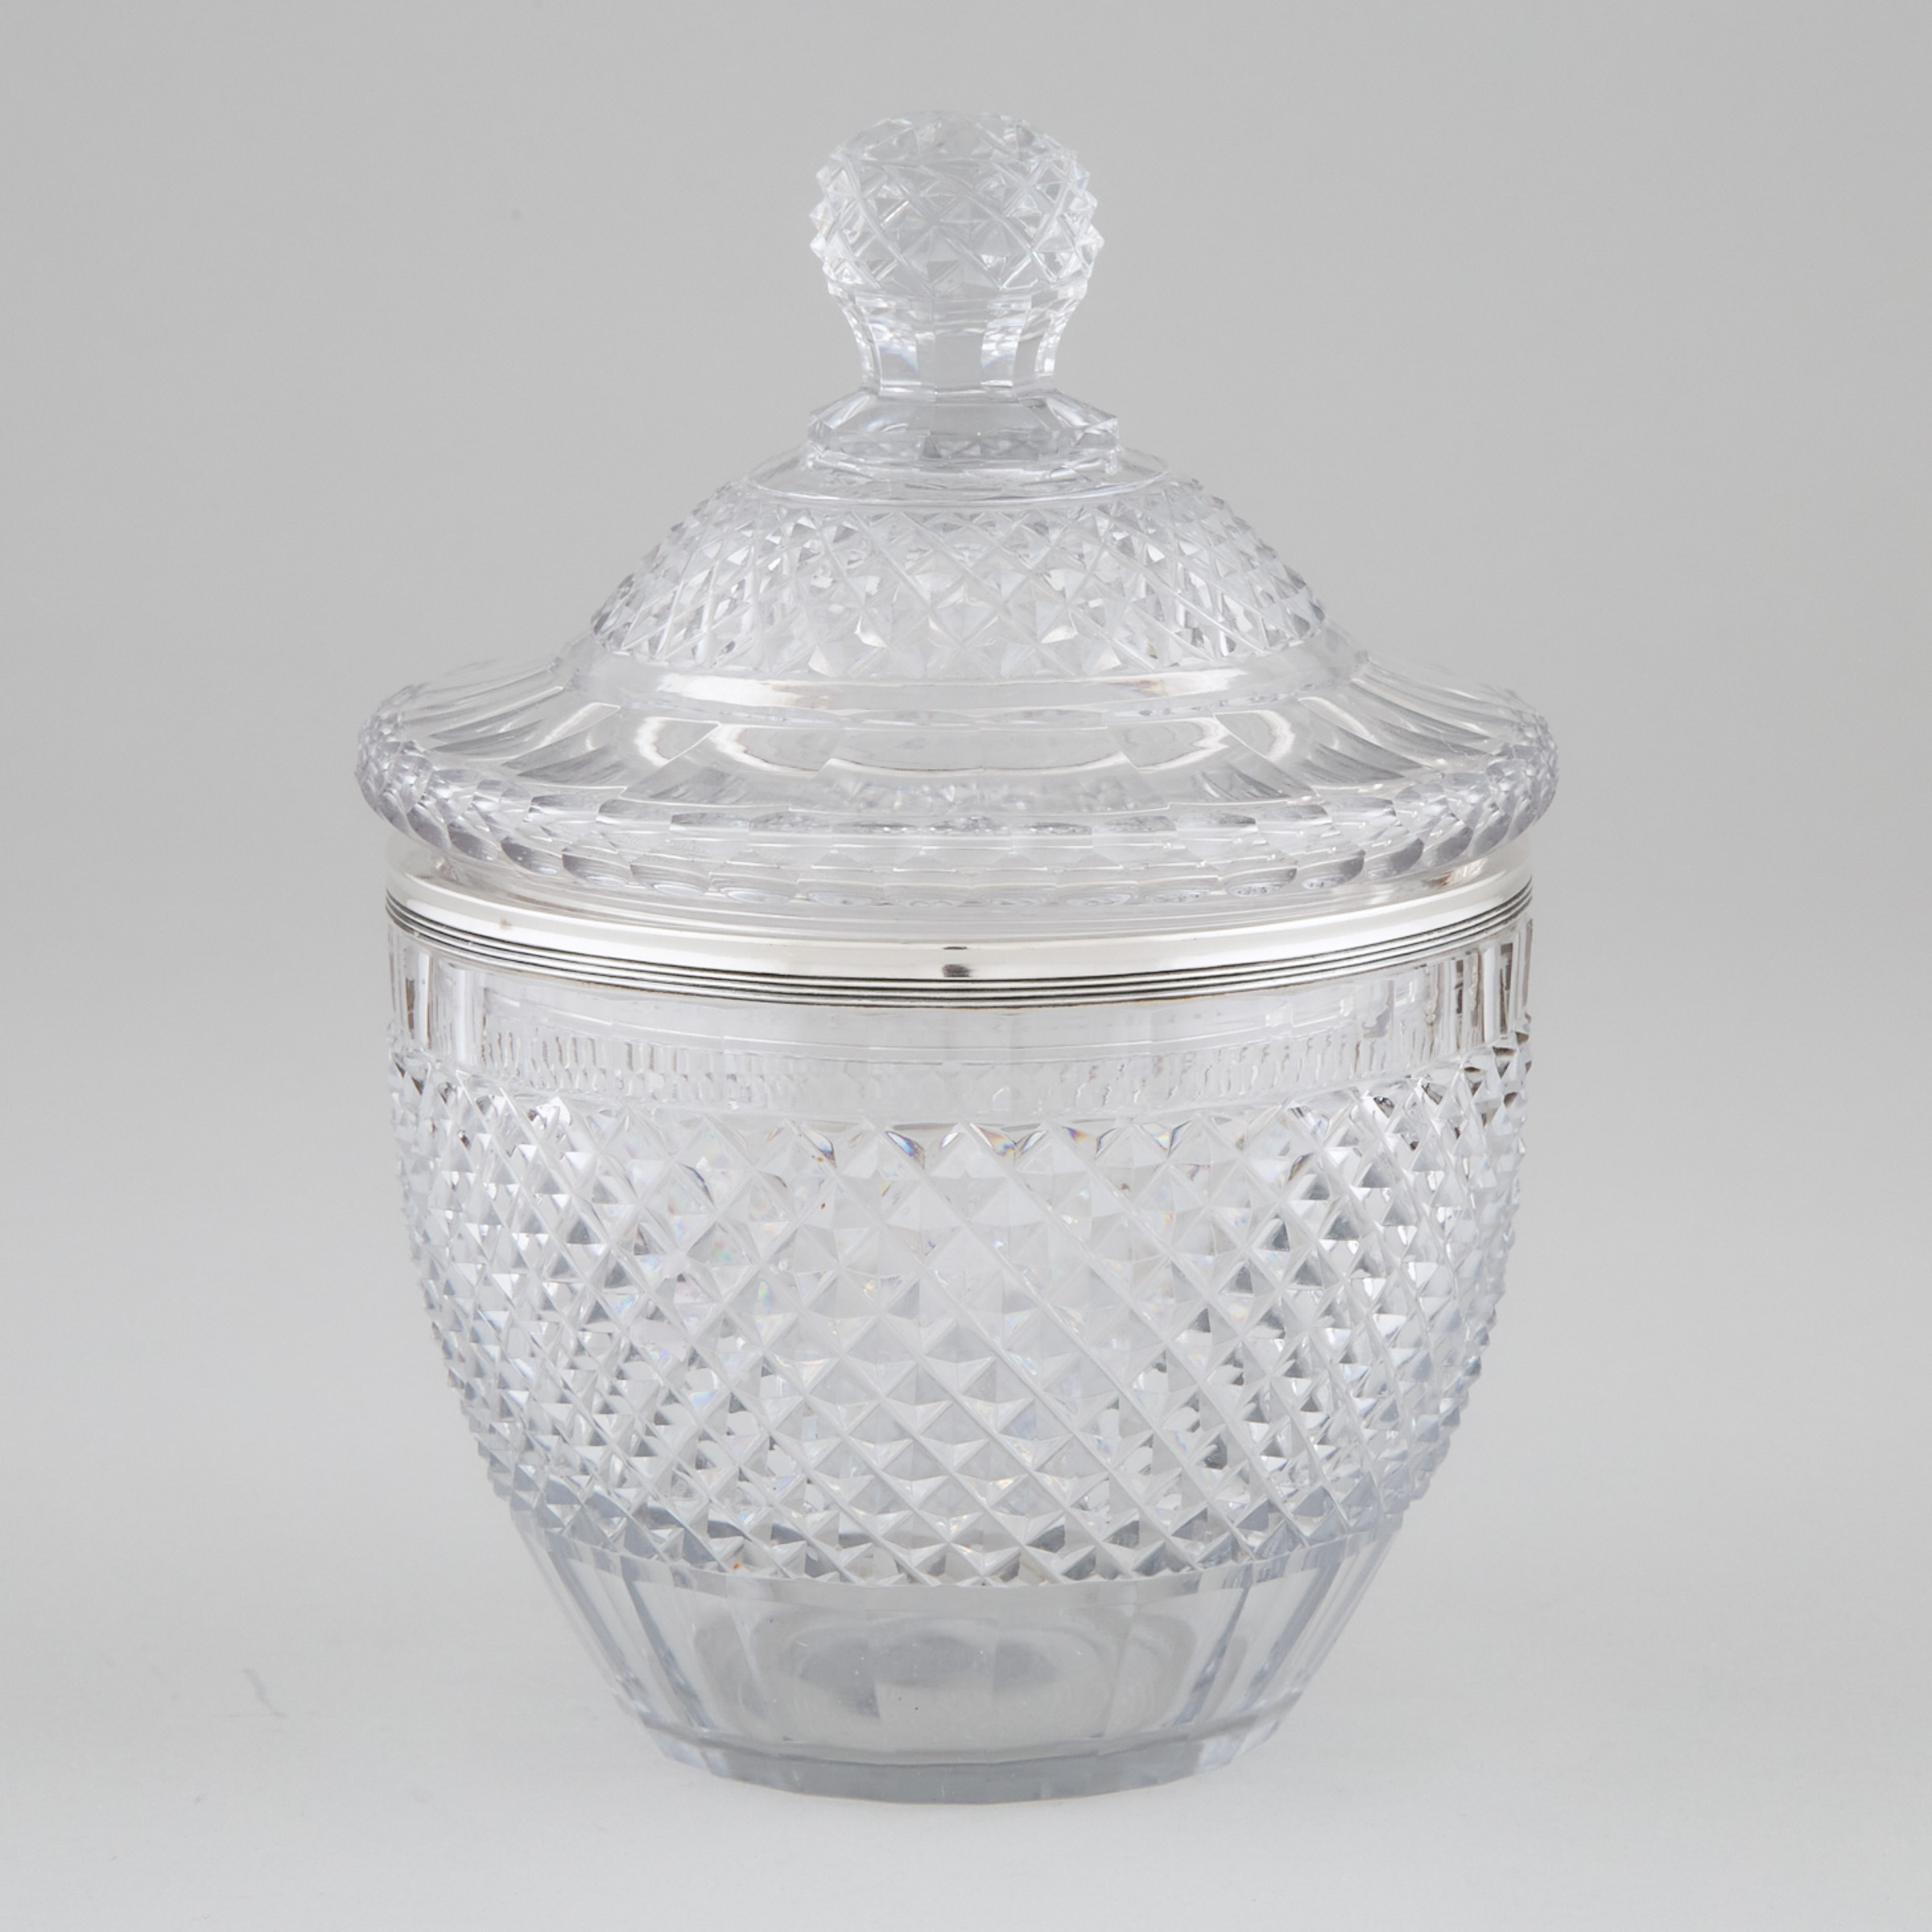 Dutch Silver Mounted Cut Glass Covered Sauce Tureen, 19th century